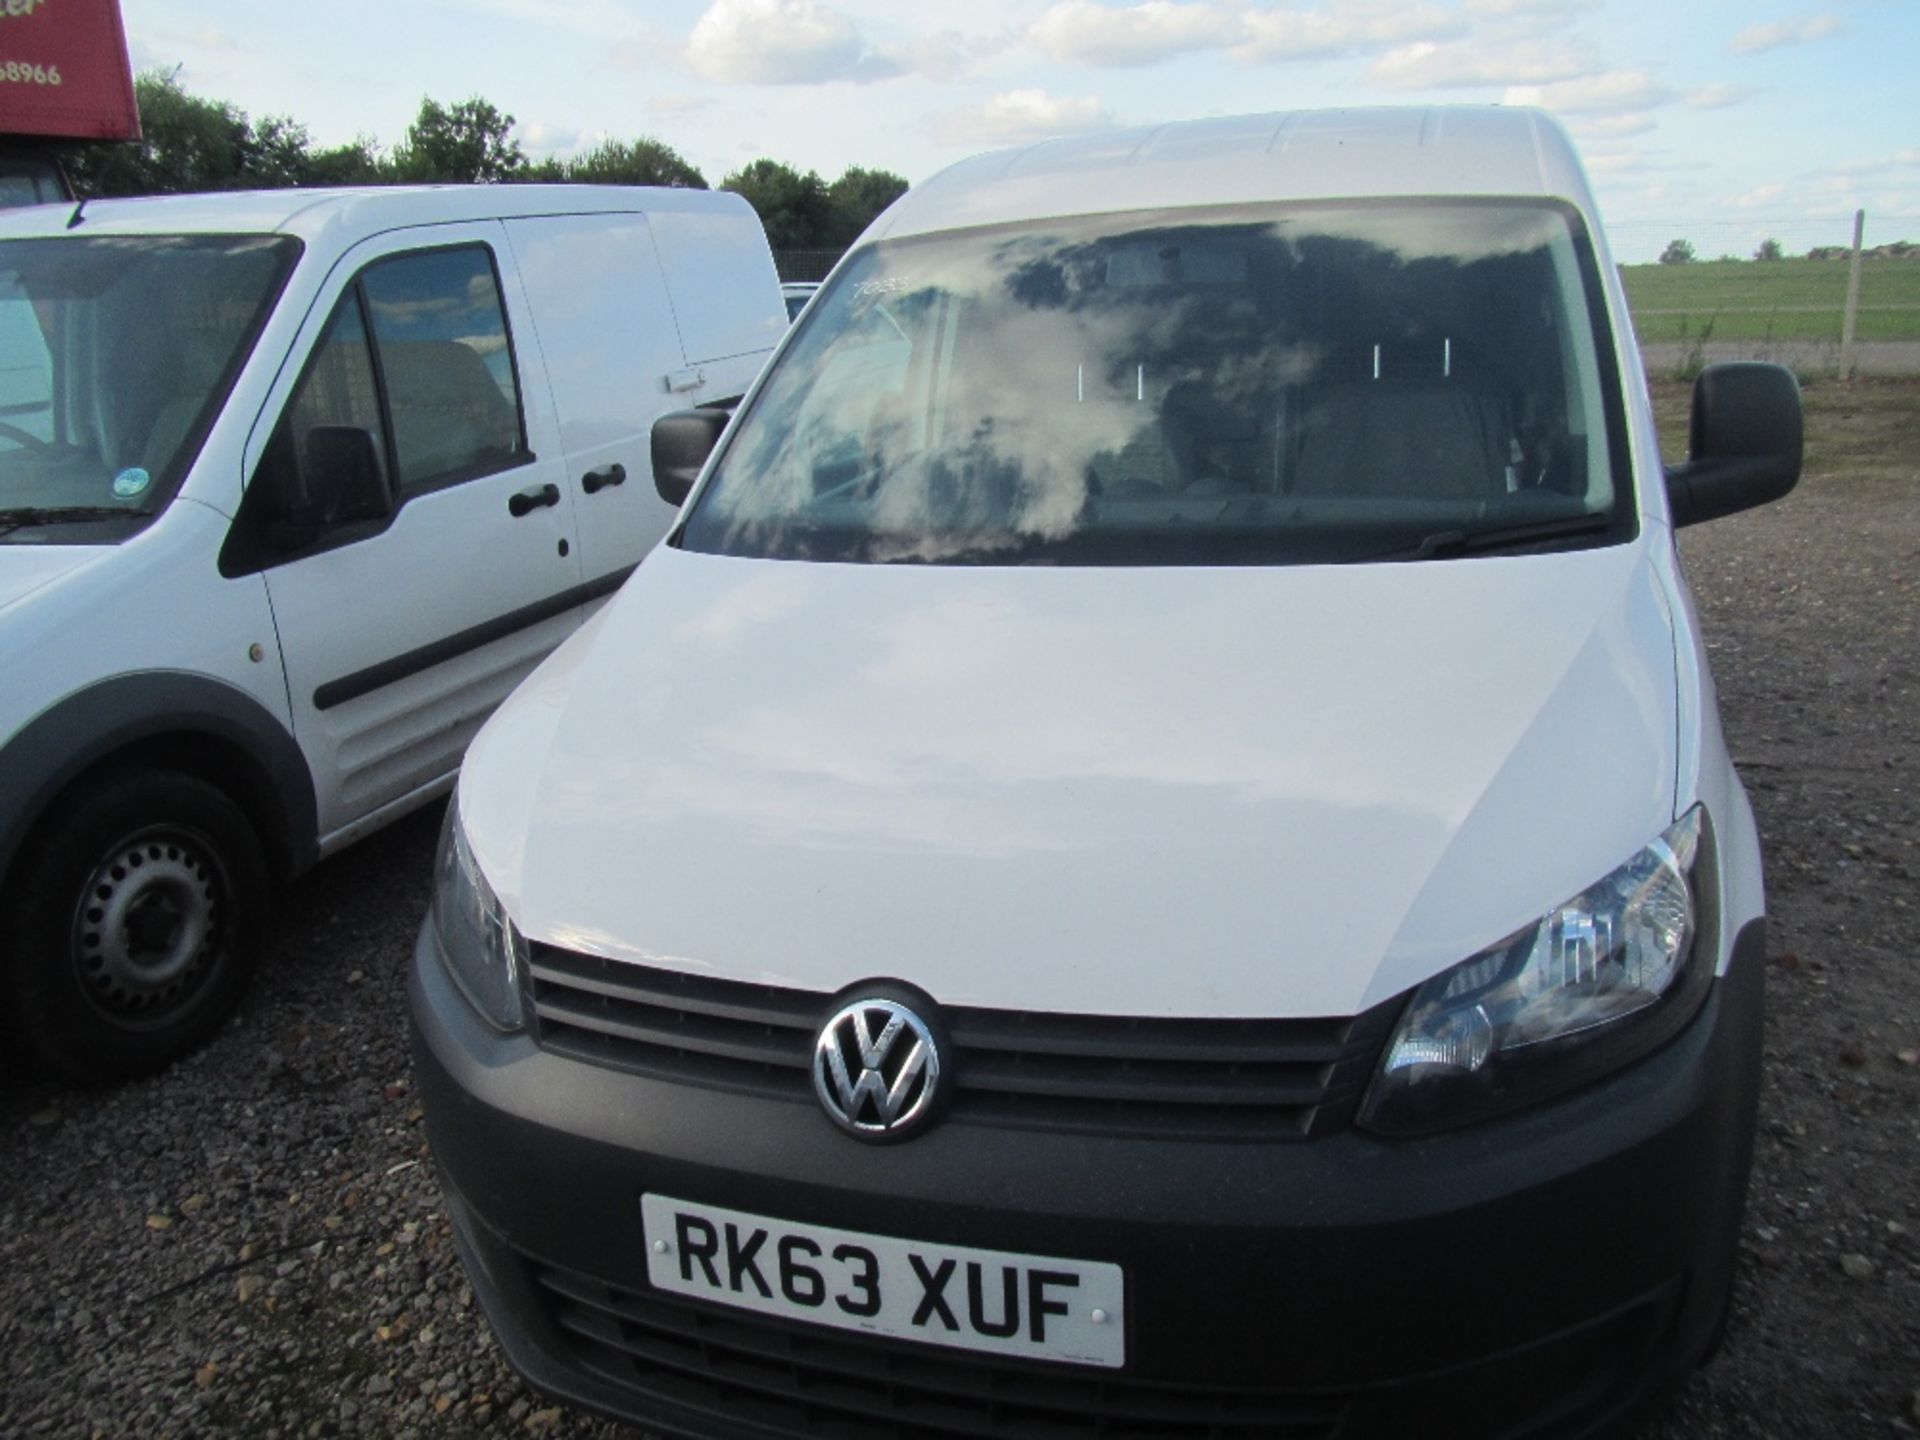 2013 VW Caddy C20 Startline TDI 5 Speed Manual Panel Van. Registration Documents will be supplied. - Image 2 of 5